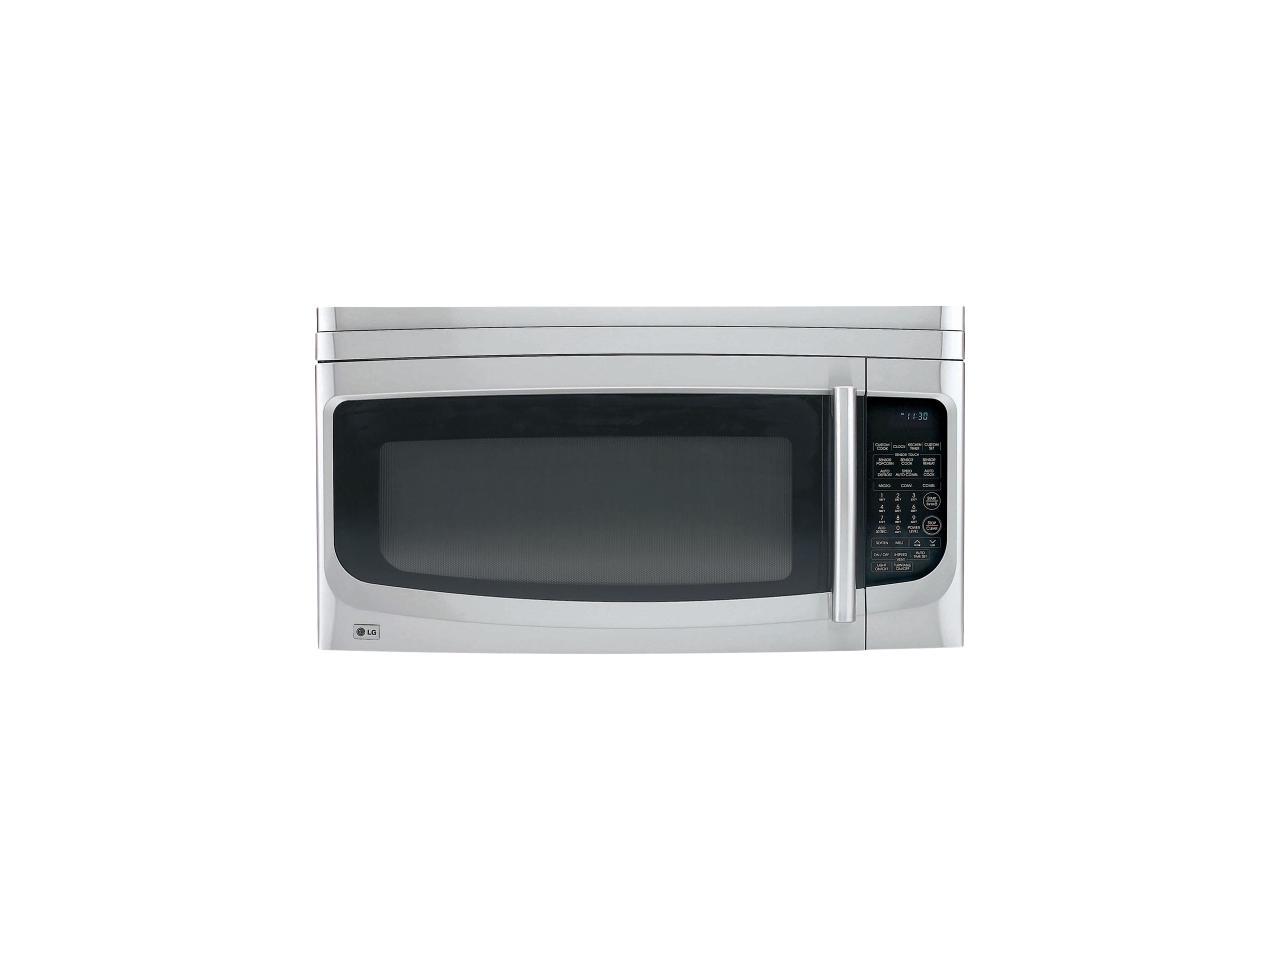 LG Convection 1500 Watts Convection Over The Range Microwave Oven LMVH1750 Sensor Cook